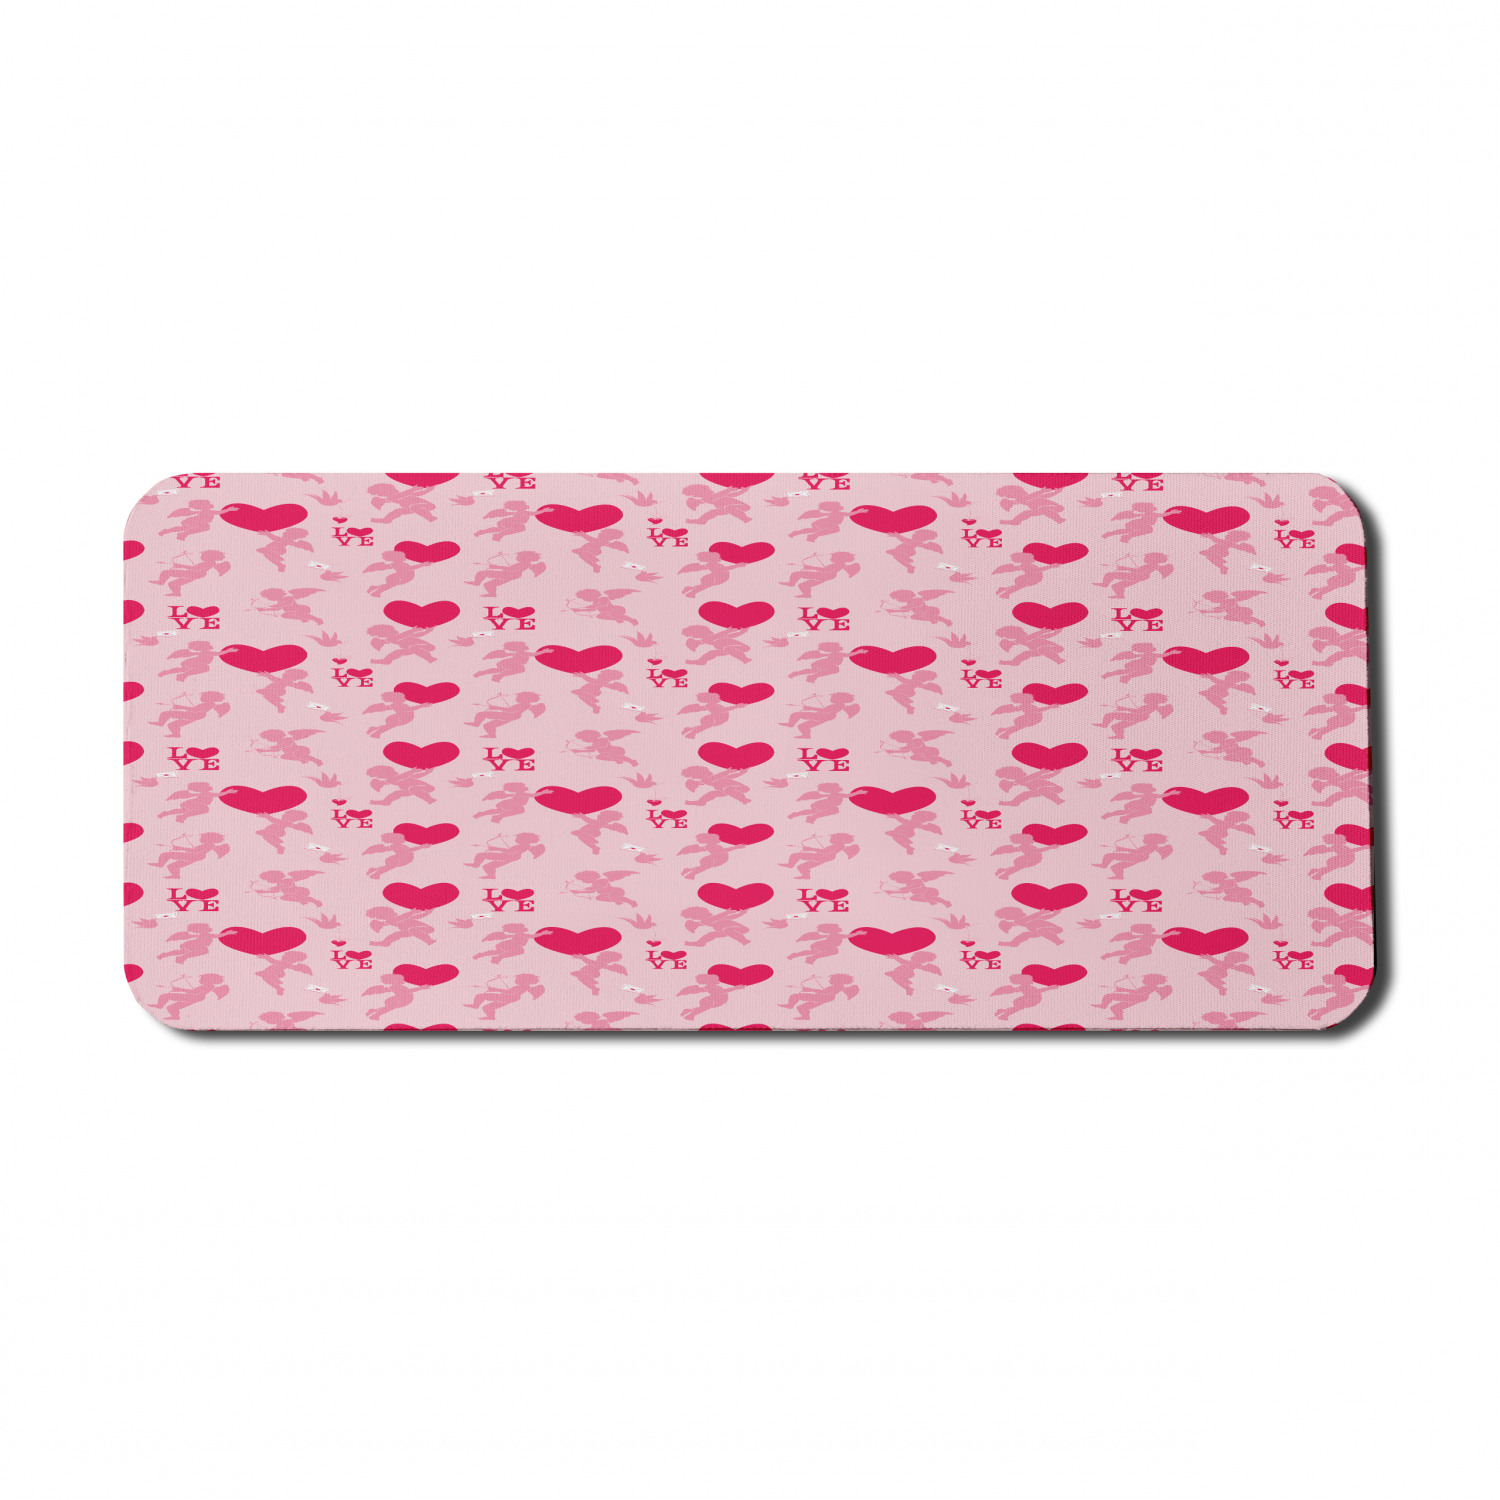 Love Computer Mouse Pad, Pattern with Silhouettes of Angel Heart Bird and Calligraphic Text Love Artwork Print, Rectangle Non-Slip Rubber Mousepad X-Large, 35" x 15", Rose Pink, by Ambesonne - image 1 of 2